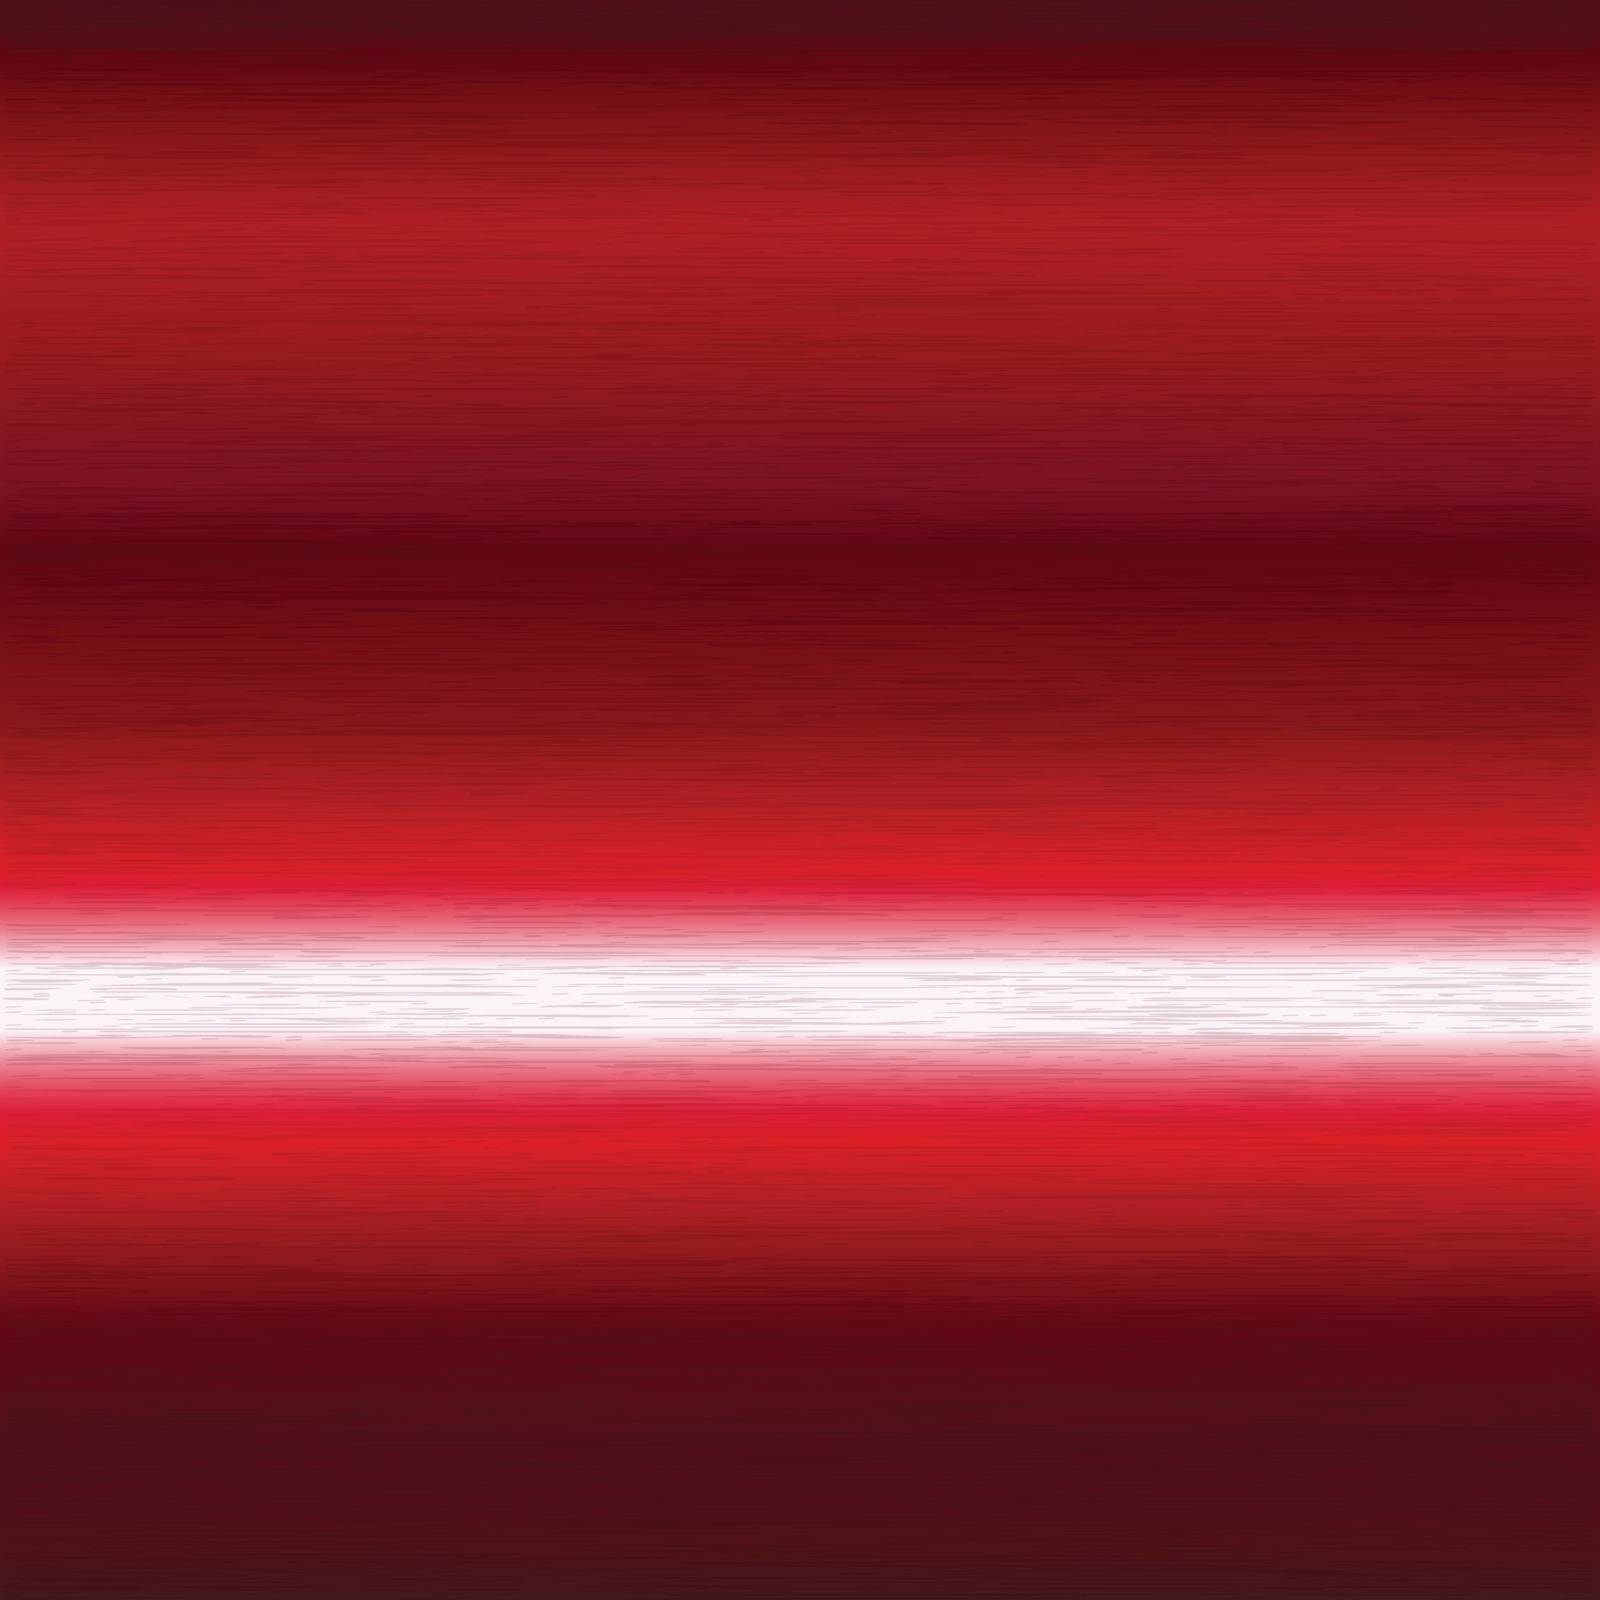 background or texture of brushed red surface